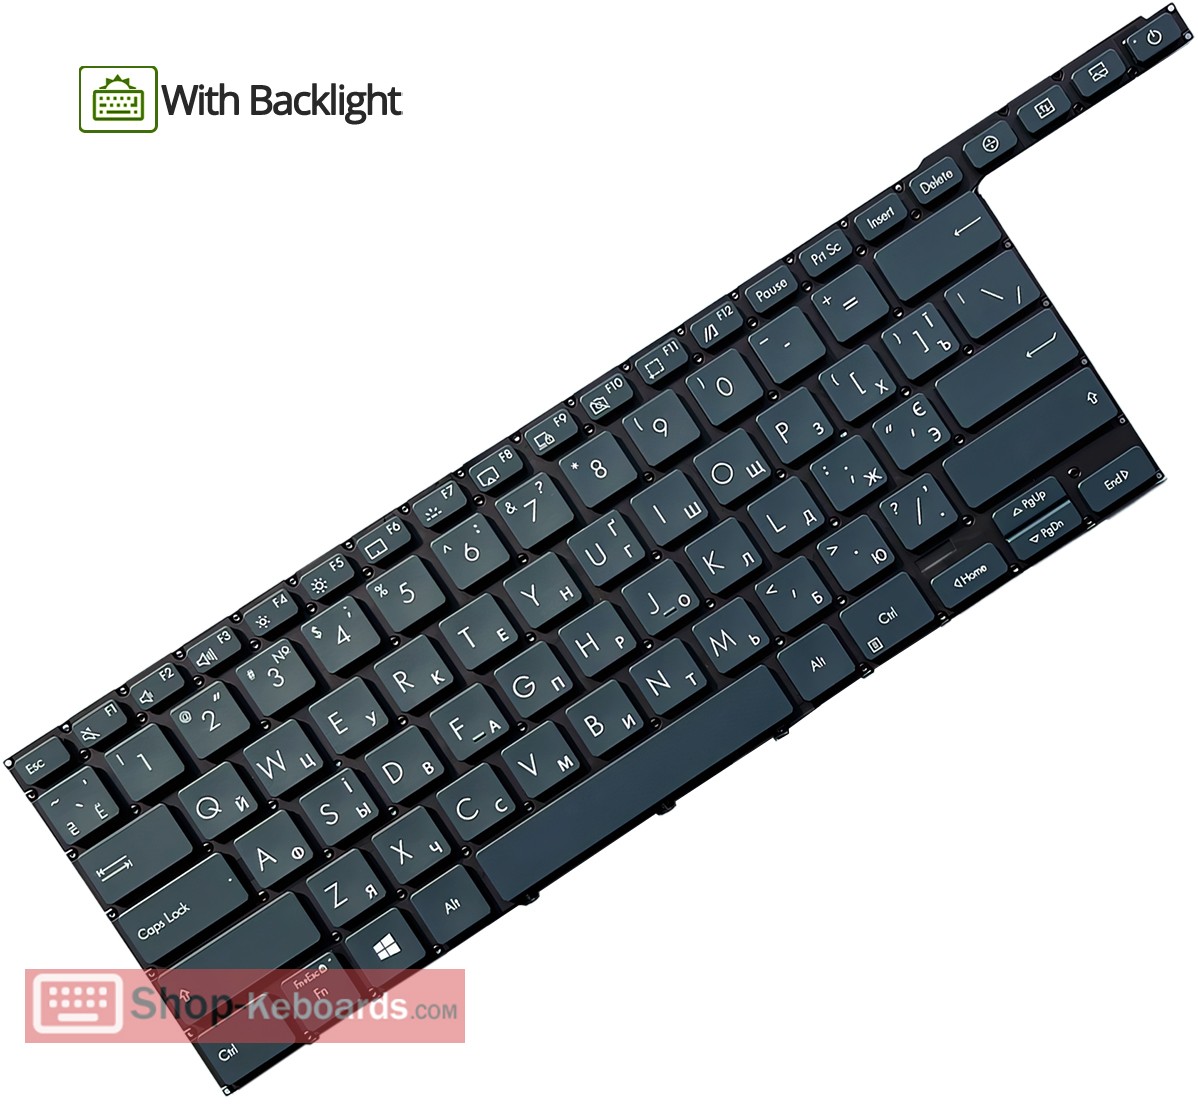 Asus 0KNB0-6823FR00  Keyboard replacement